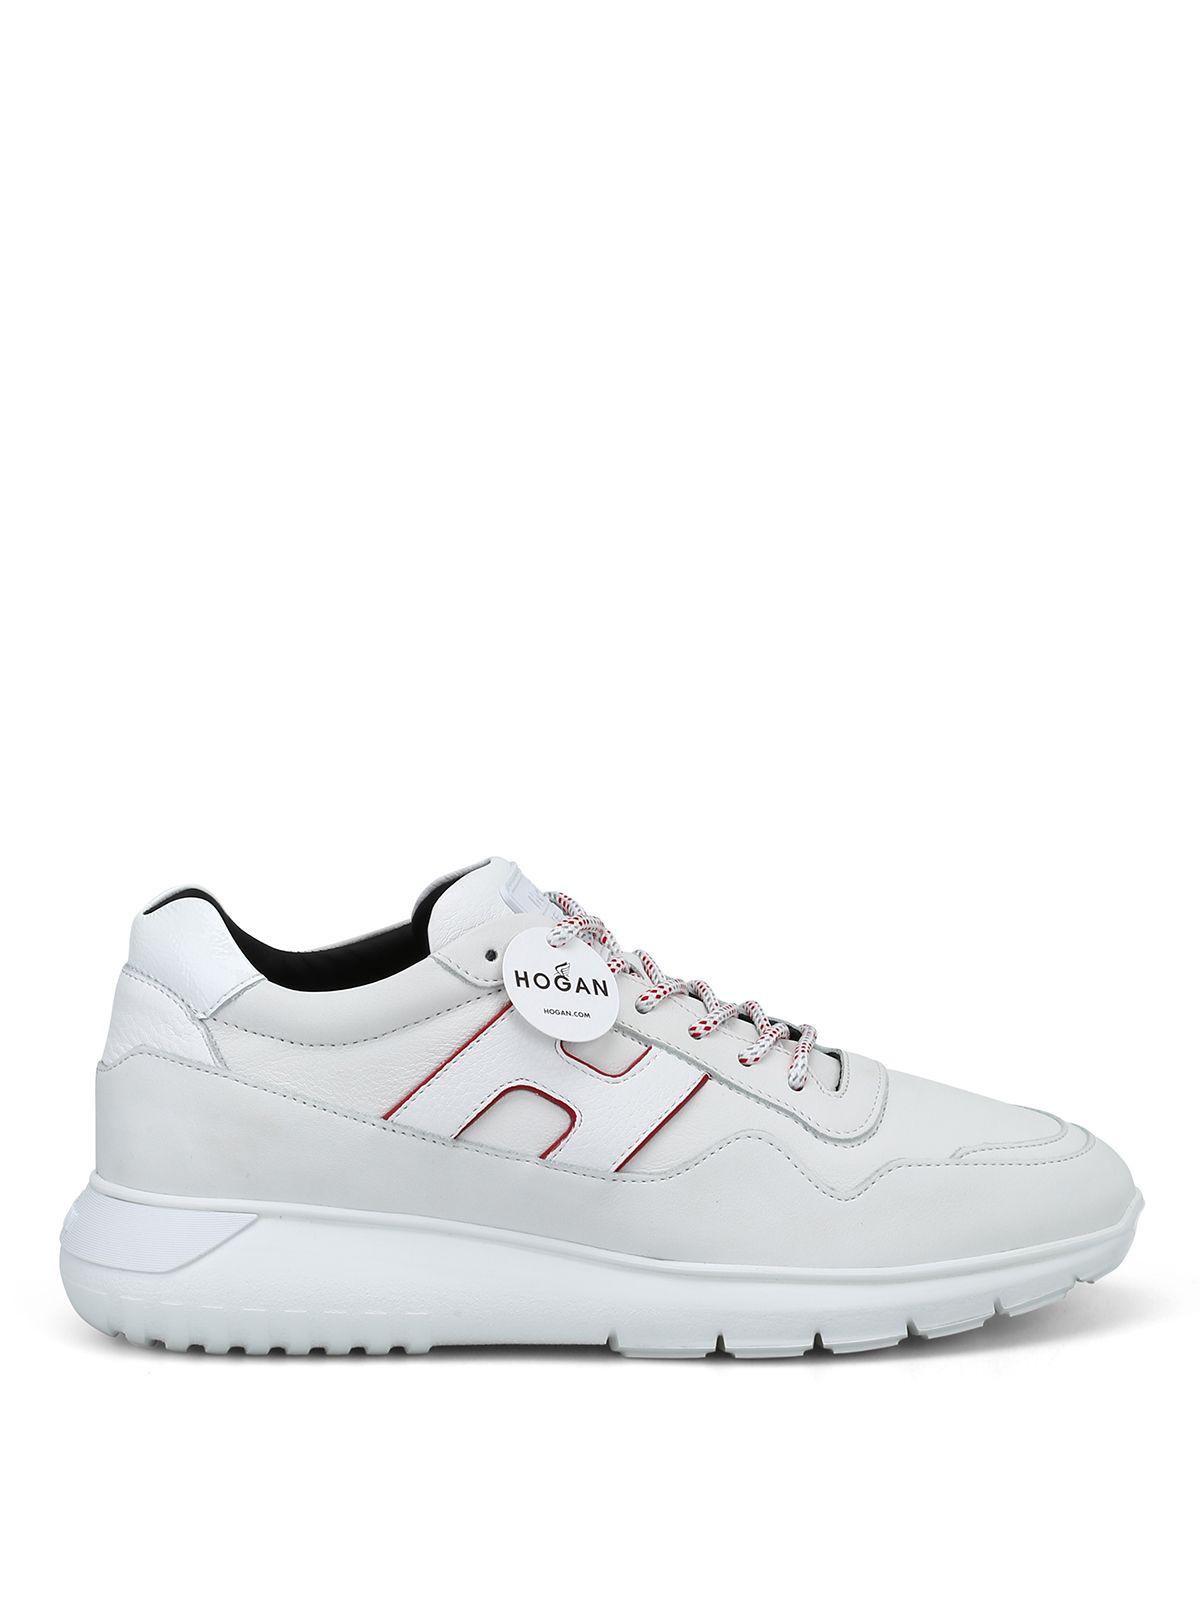 Hogan Interactive³ Sneakers In White/ivory | ModeSens